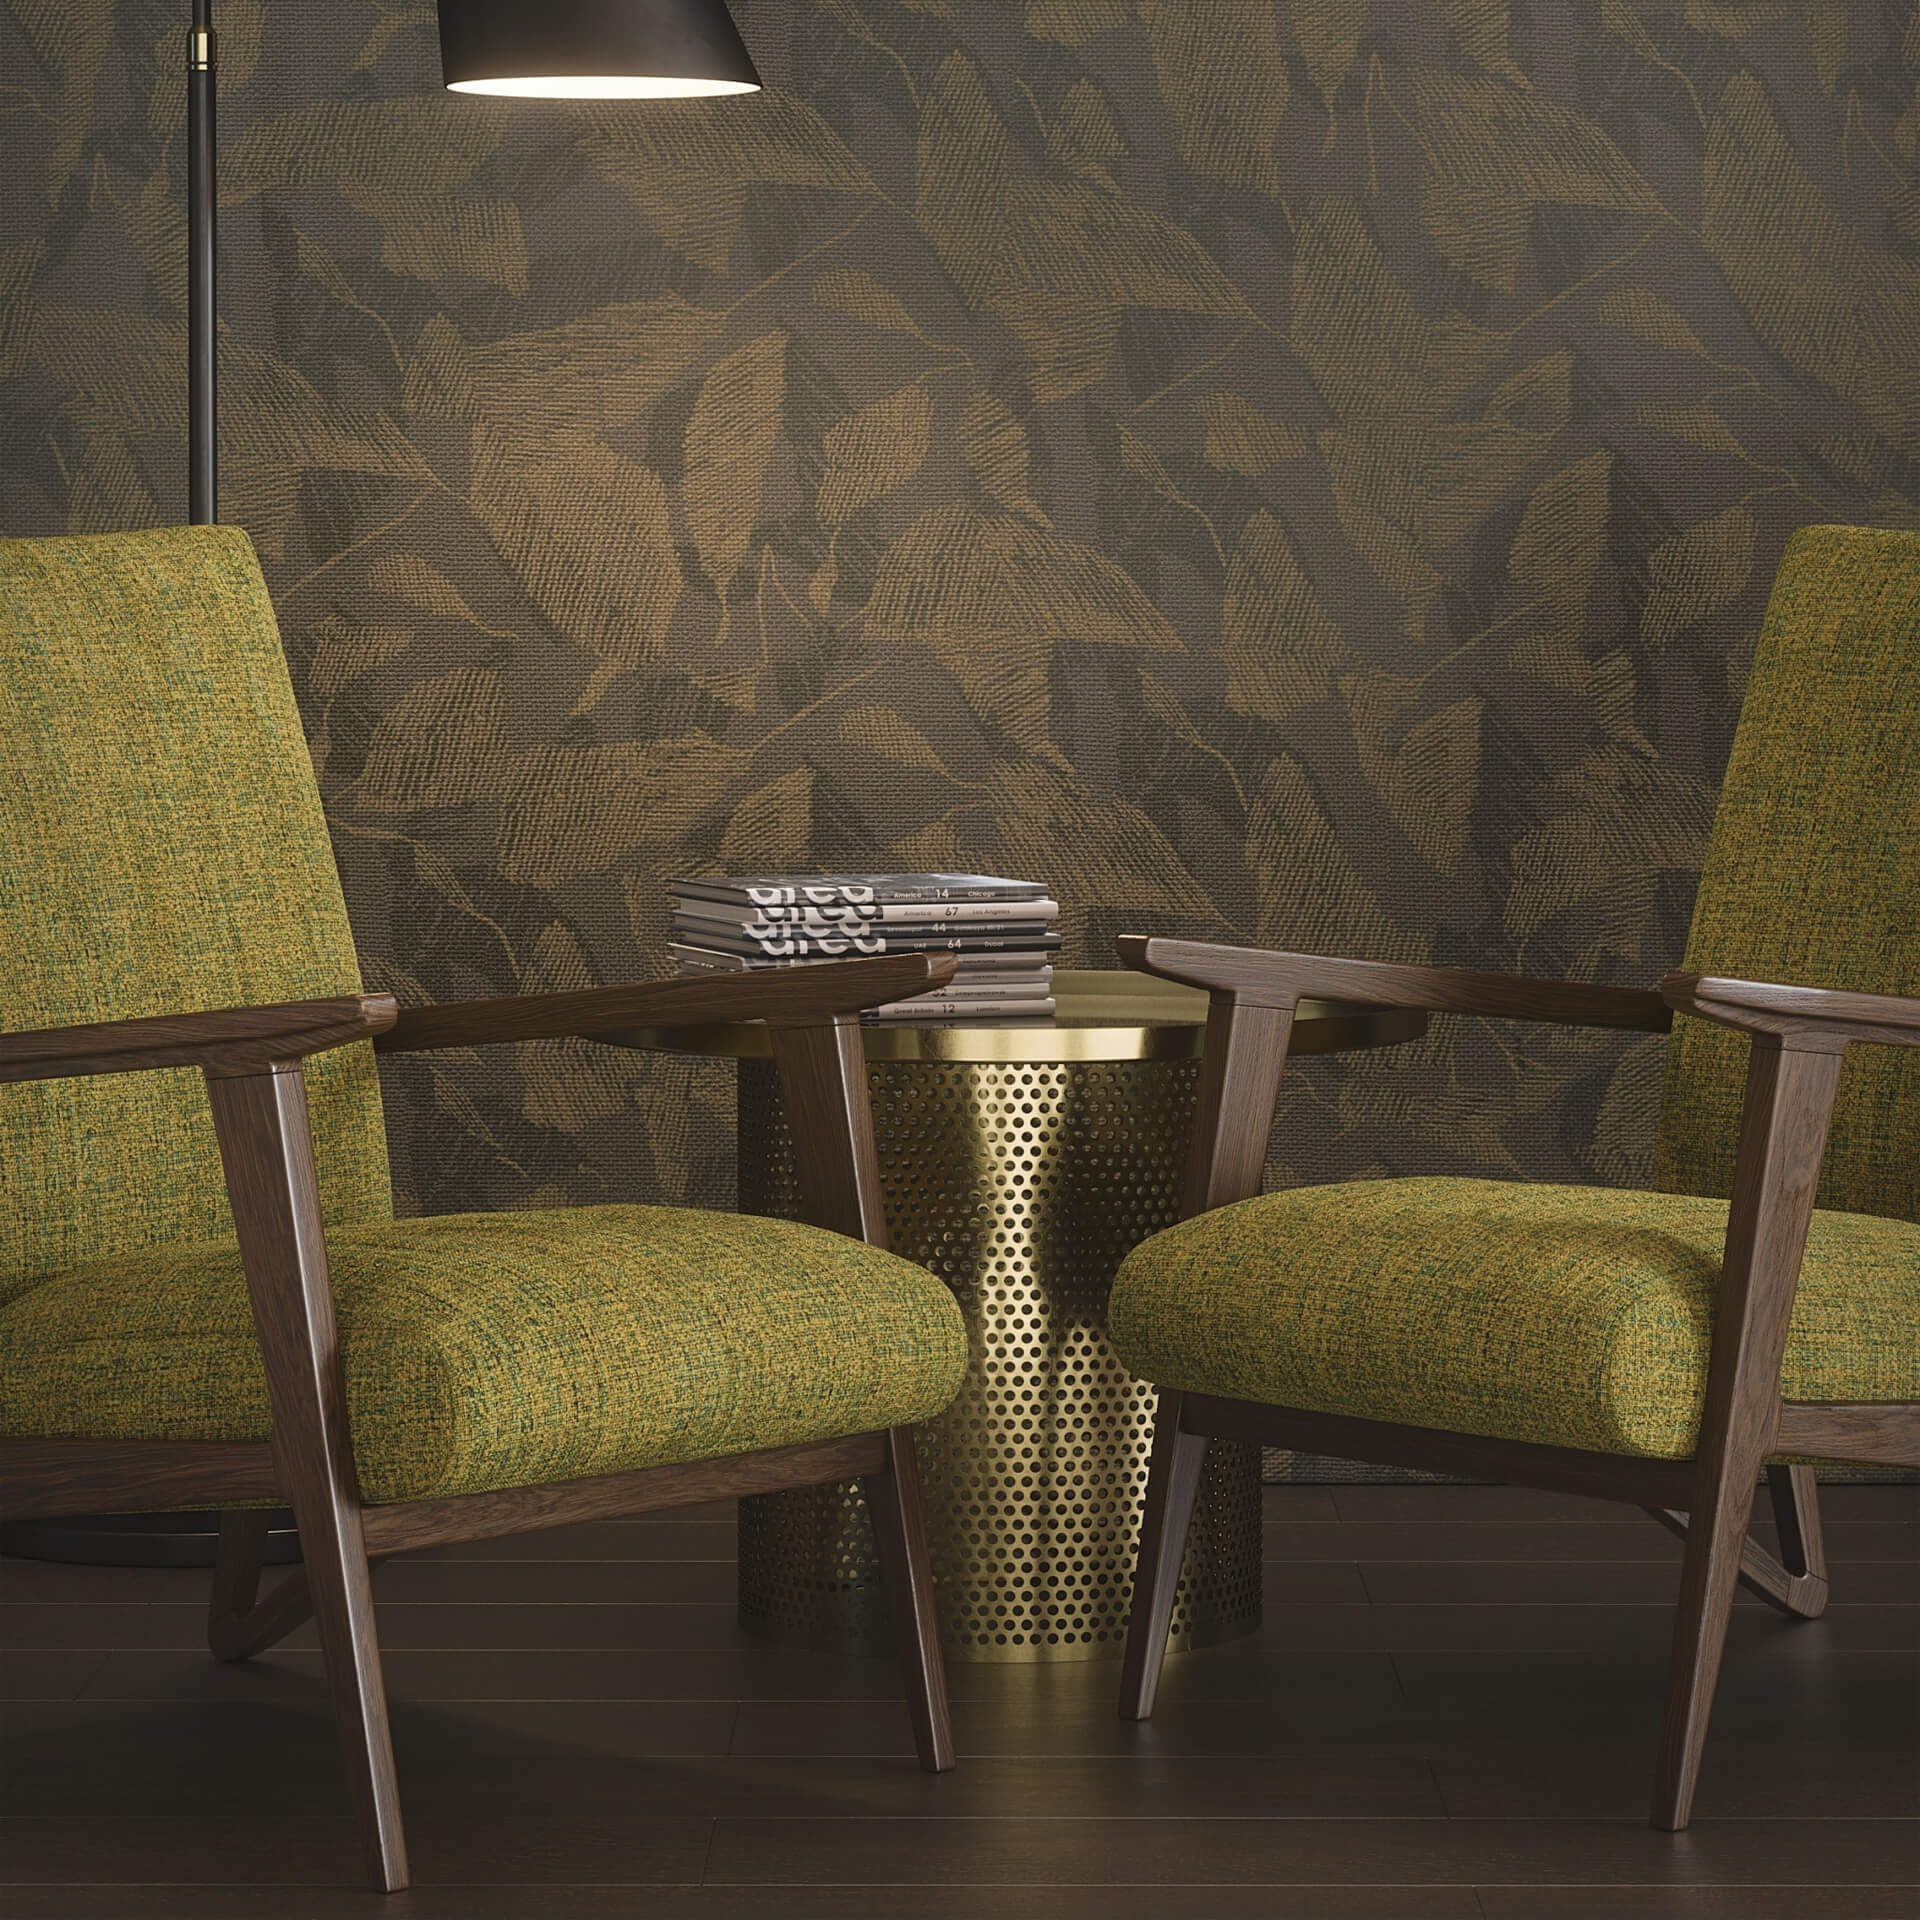 Lifestyle 3D Rendering of Green Fabric on Chairs